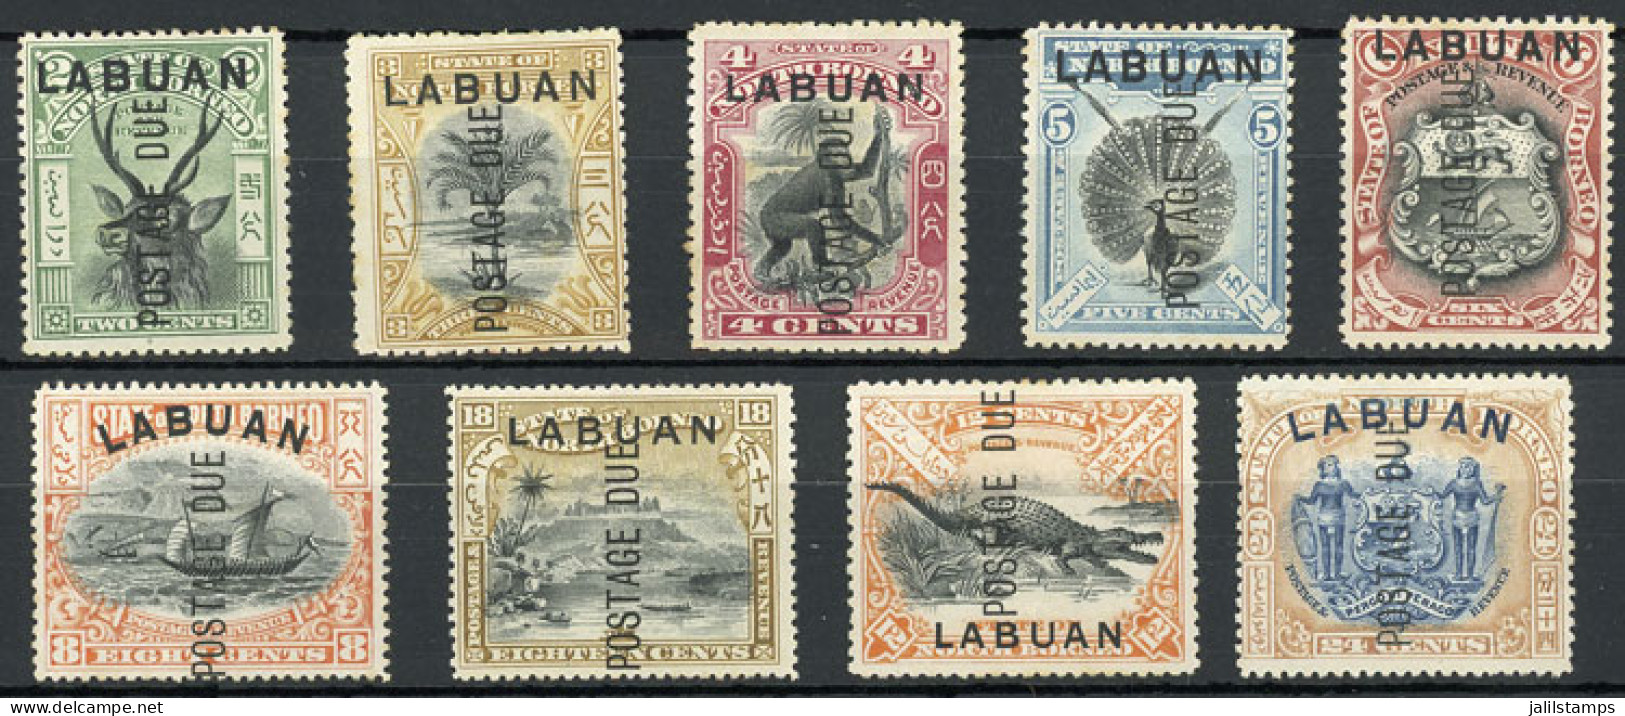 LABUAN: Sc.J1/J9, 1901 Complete Set Of 9 Values, Mint With Original Gum. The Values Of 8c. And 18c. With Perforation 15, - Straits Settlements